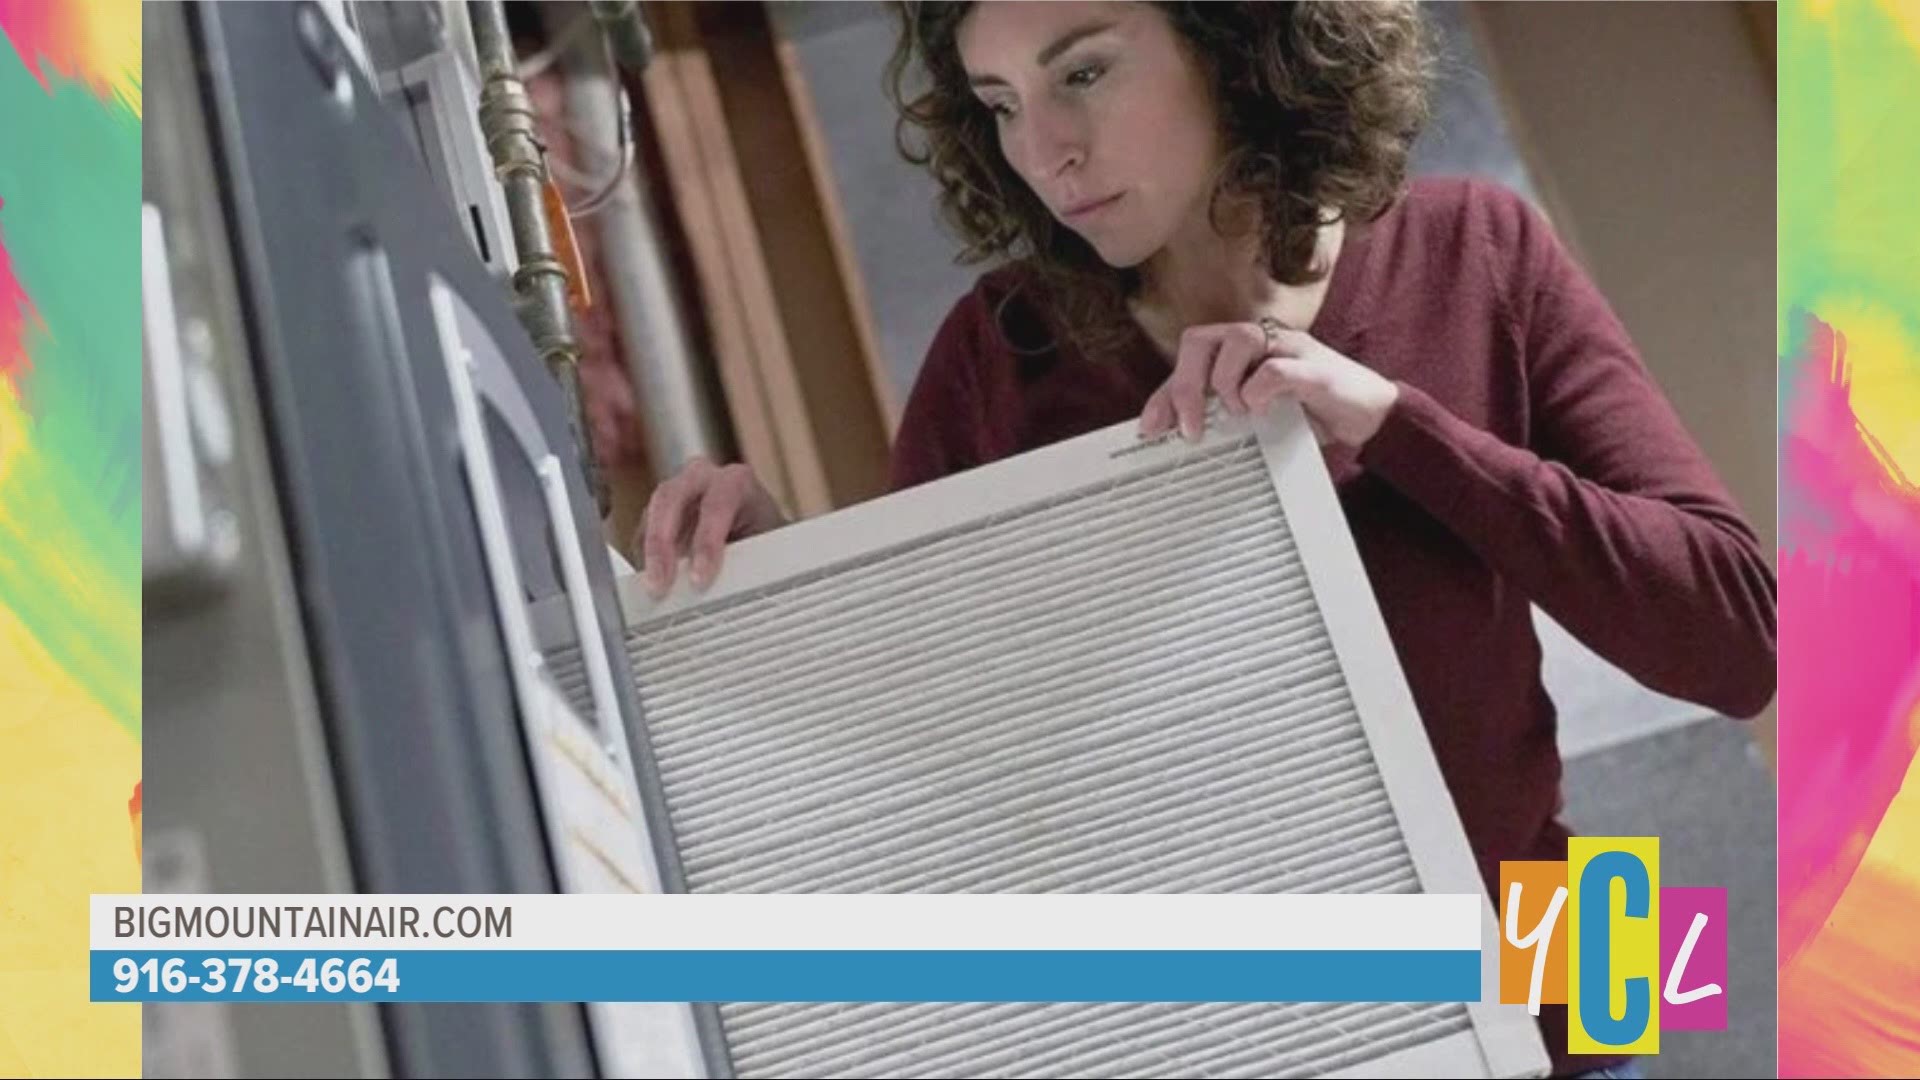 When it's time to turn on the heat, you want to be sure your furnace is in tip top shape. This segment sponsored by Big Mountain Heating and Air.